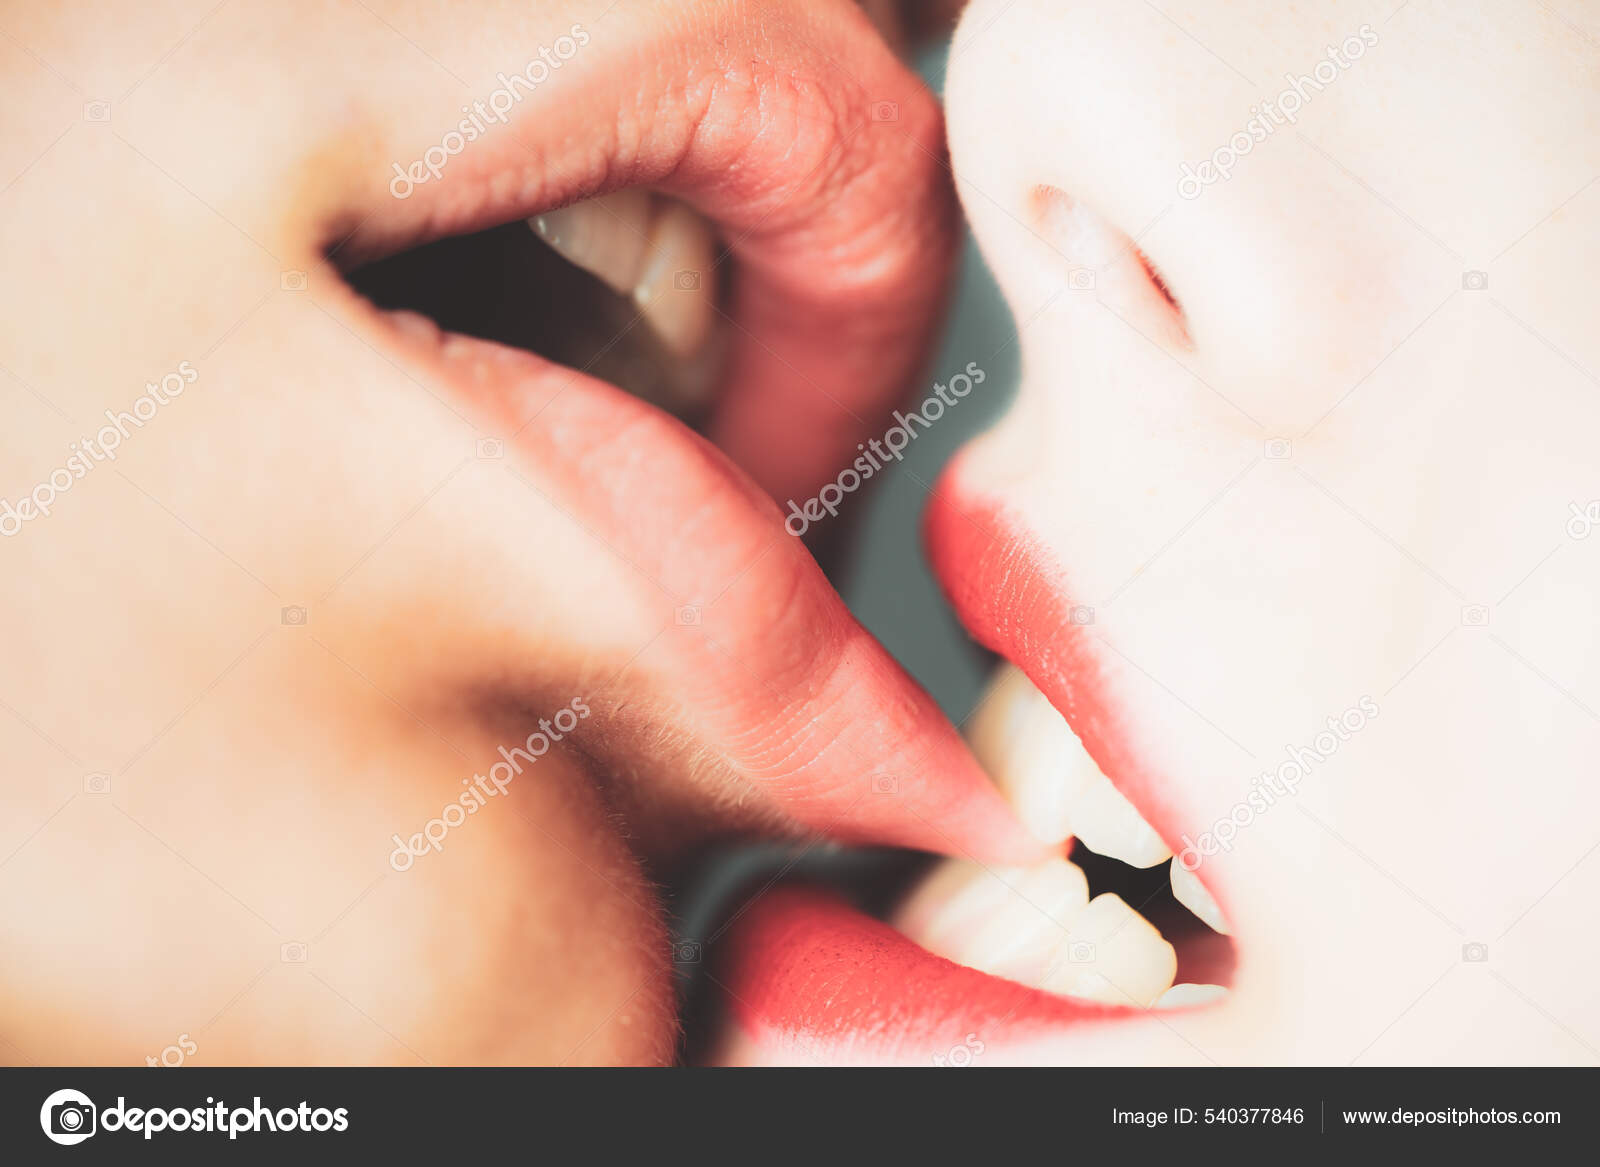 Sensual female lips kissing. Lesbian pleasures. Oral pleasure. Couple girls kissing lips close up. Sensual touch kissing sexual activity. Hot foreplay. Lip care